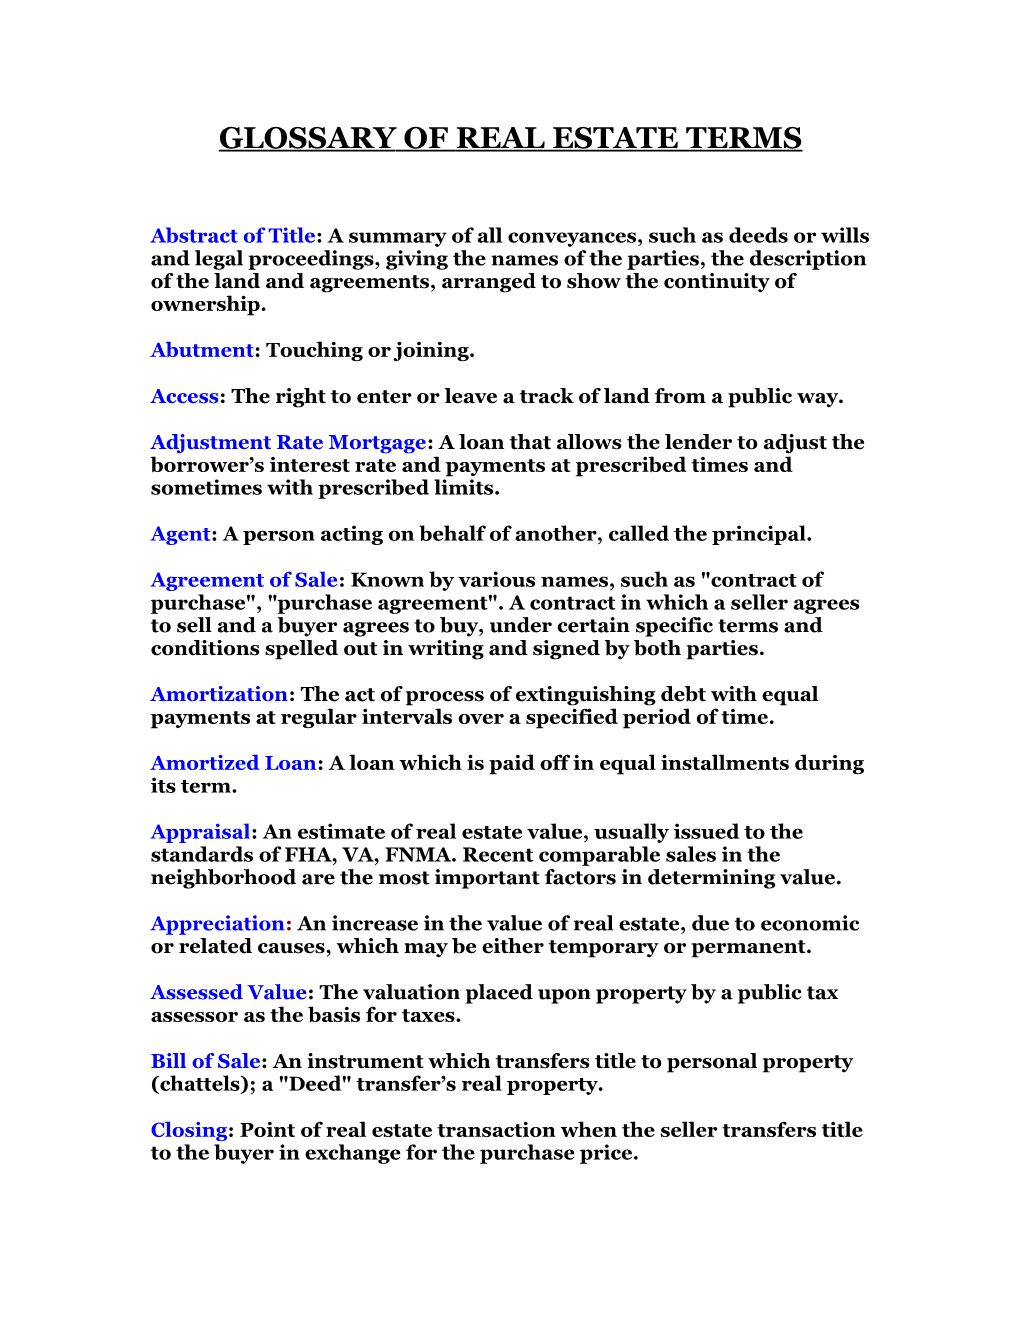 Glossary of Real Estate Terms s1